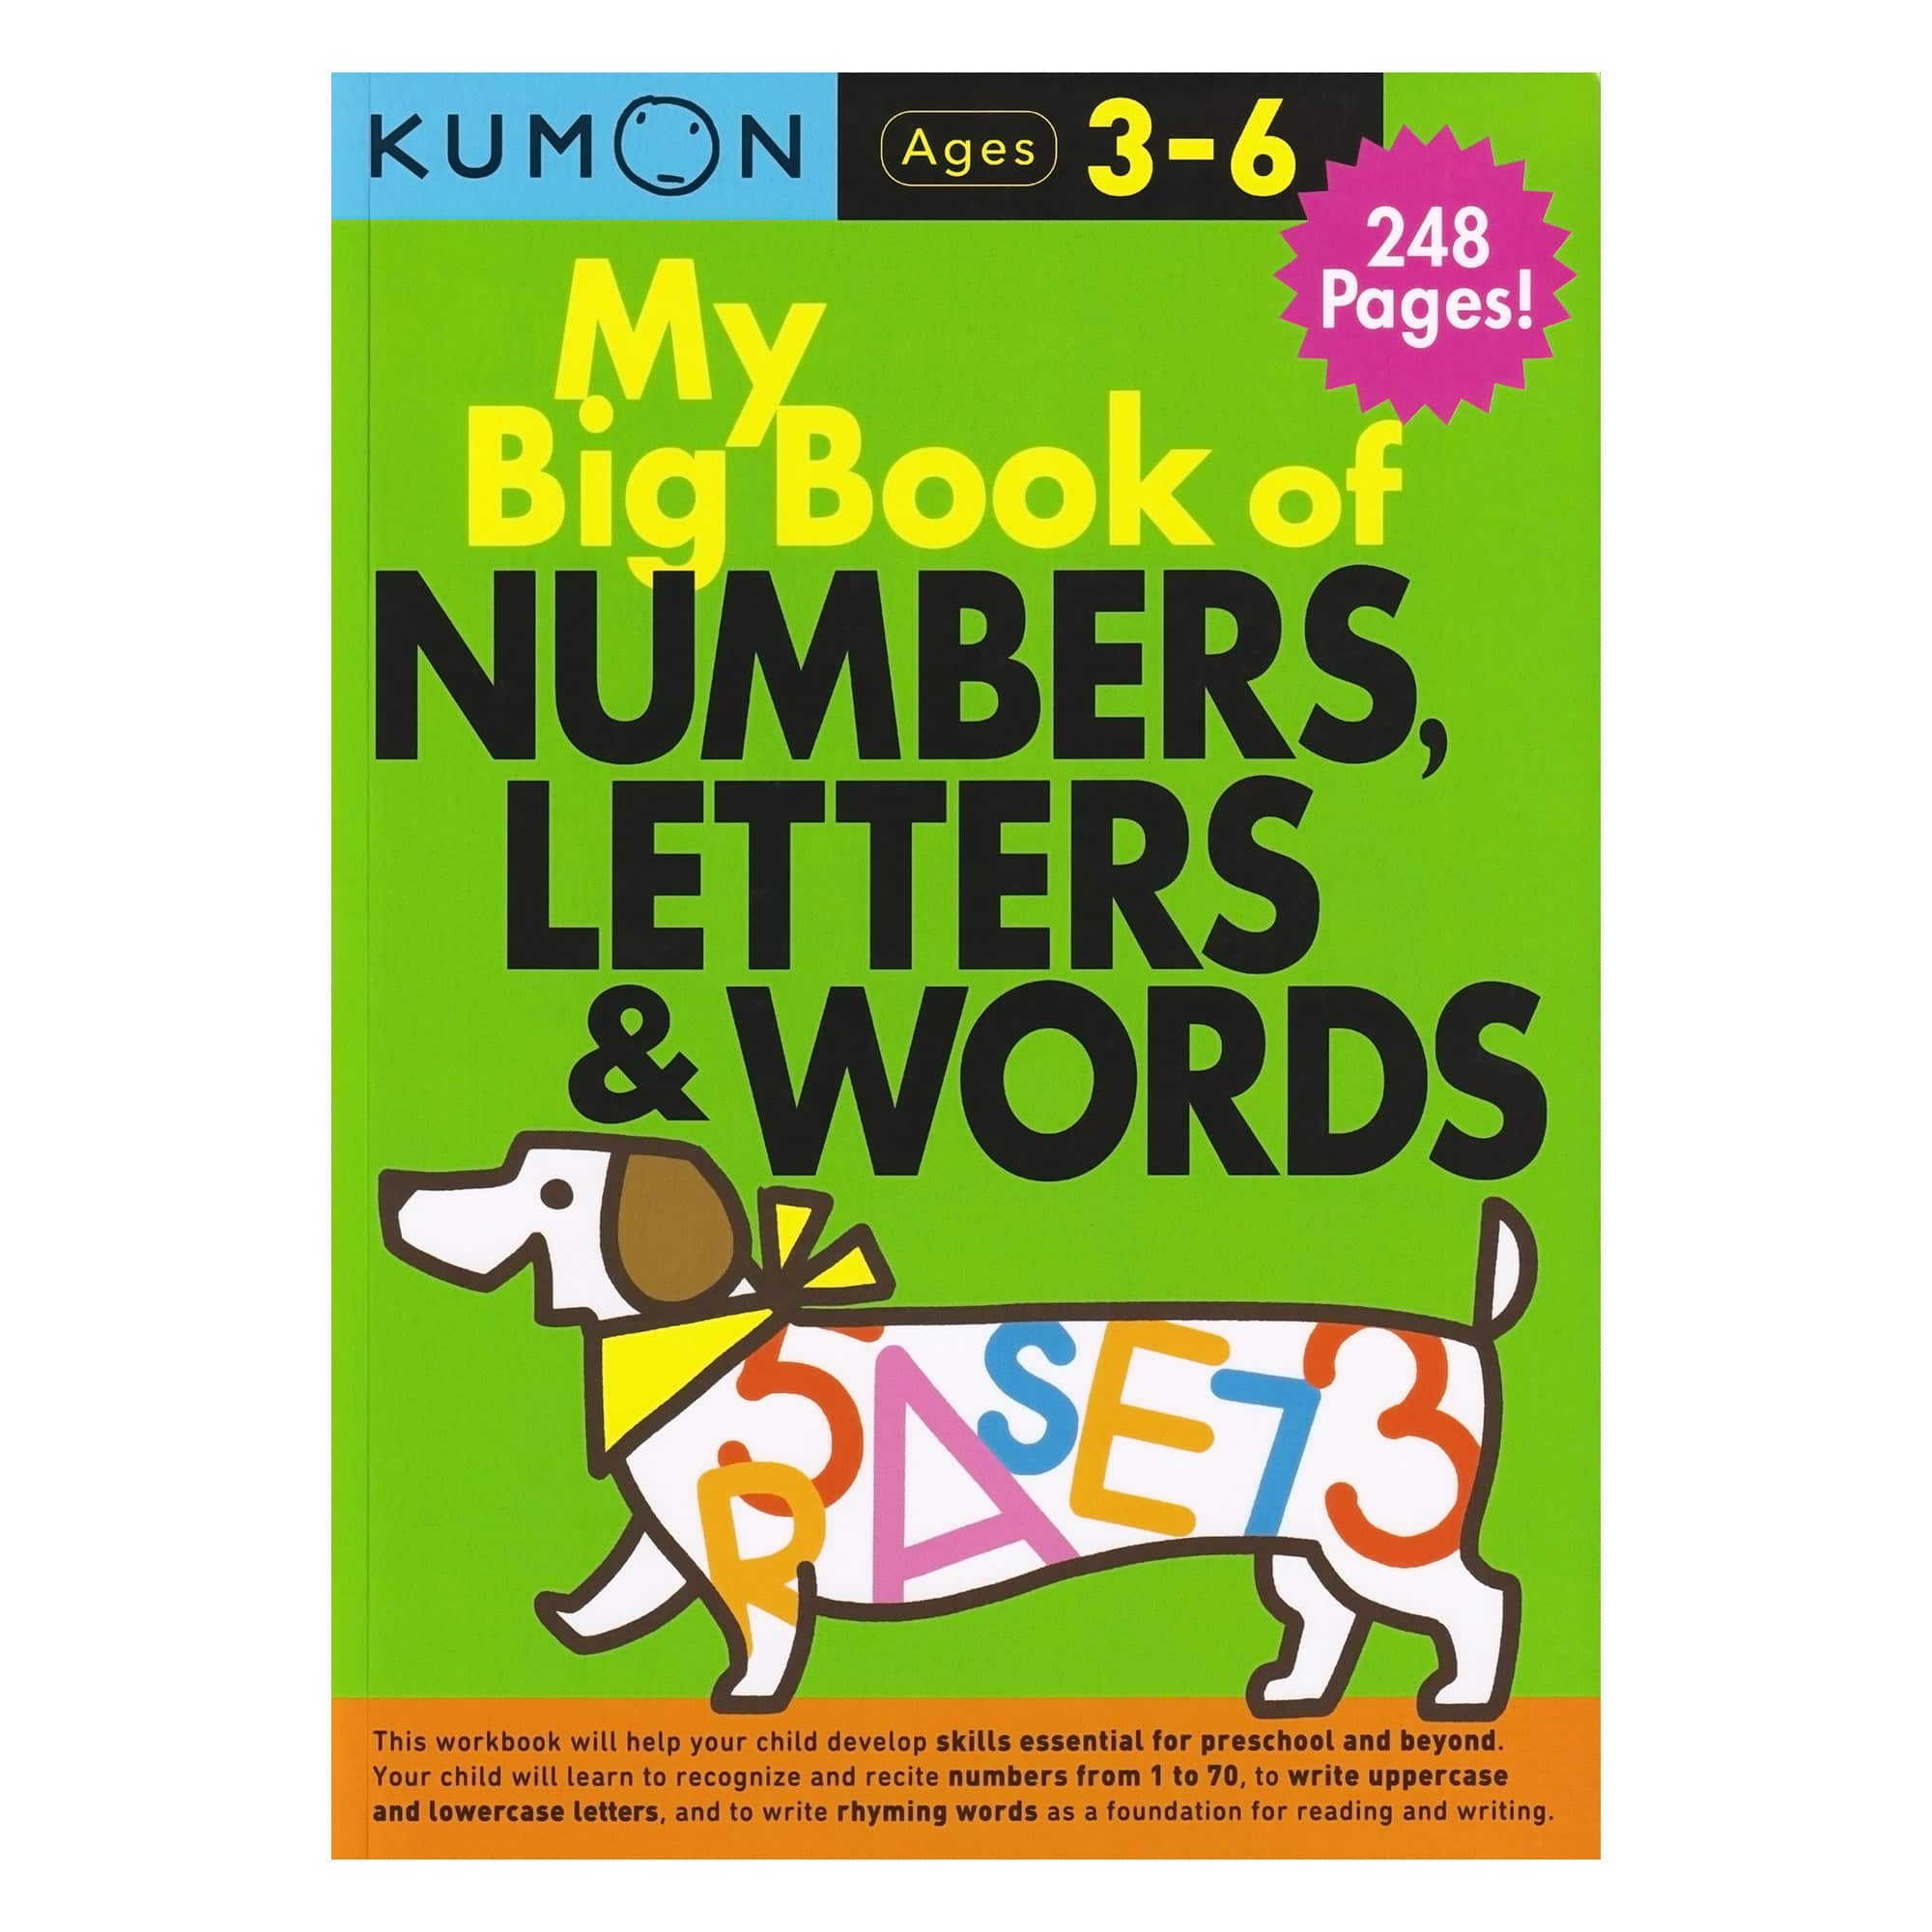 Kumon - My Big Book of Numbers, Letters & Words